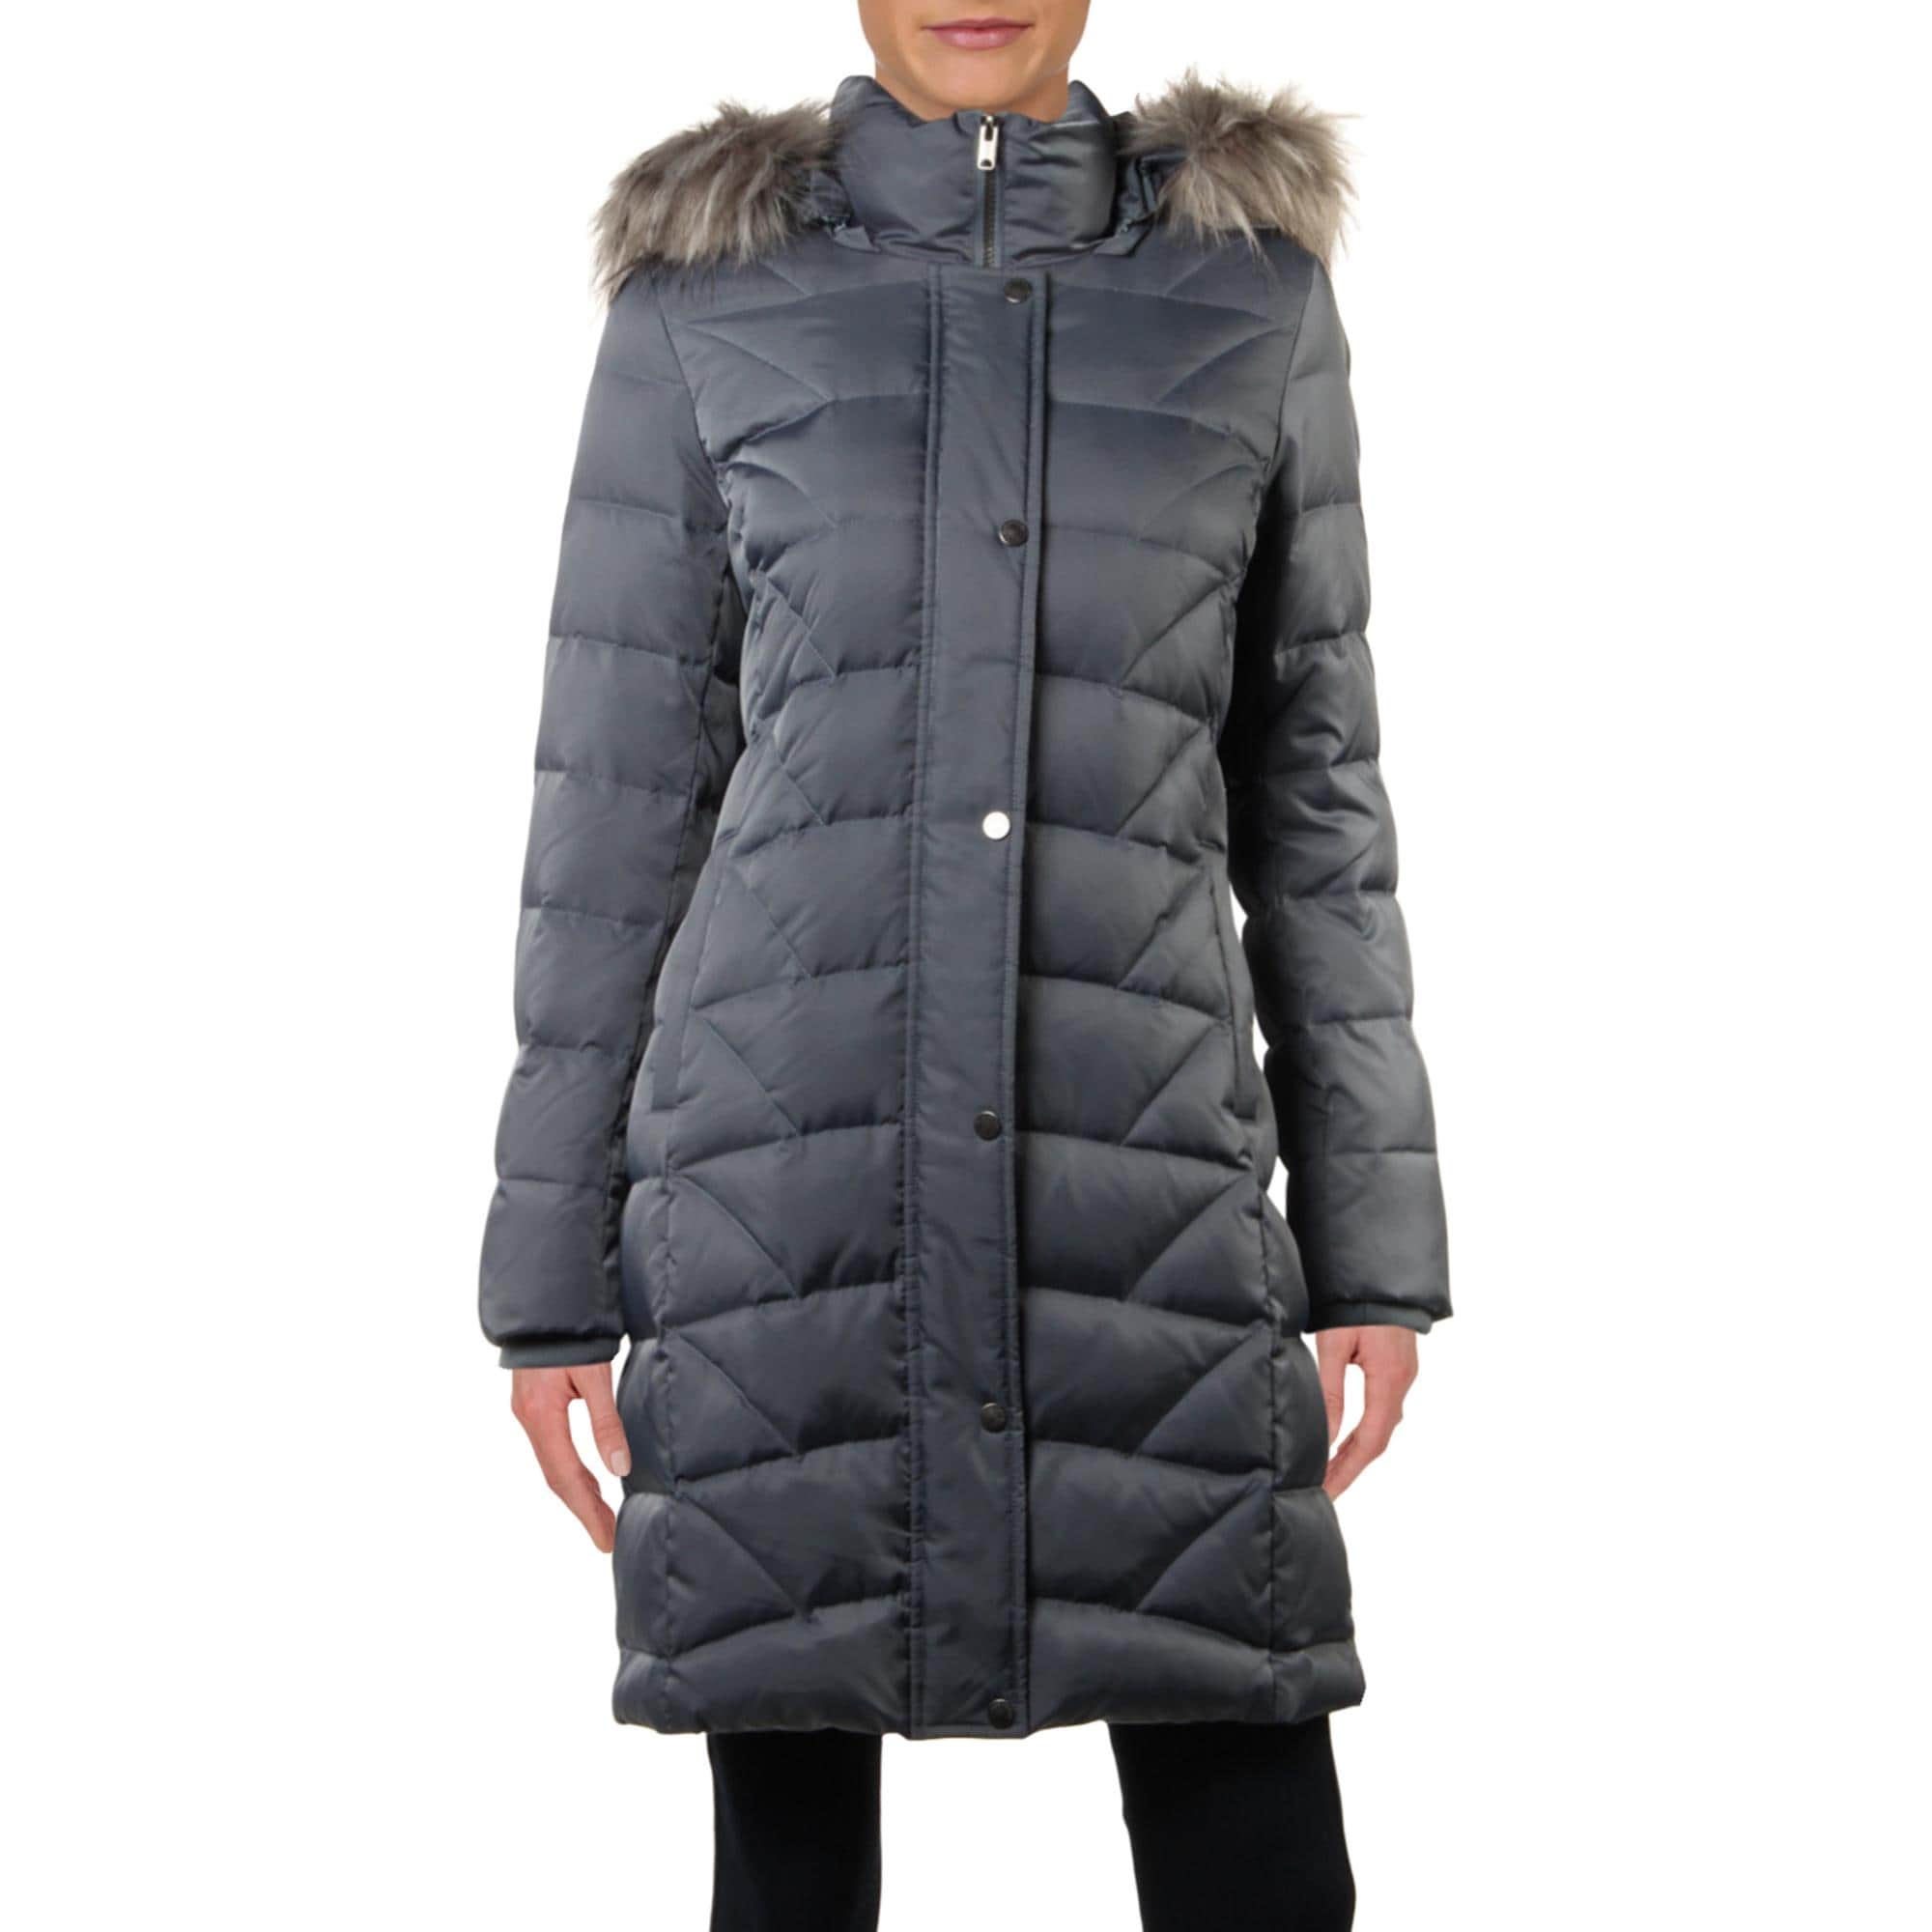 andrew marc women's long length down puffer jacket with hood, Off 66%,  www.scrimaglio.com